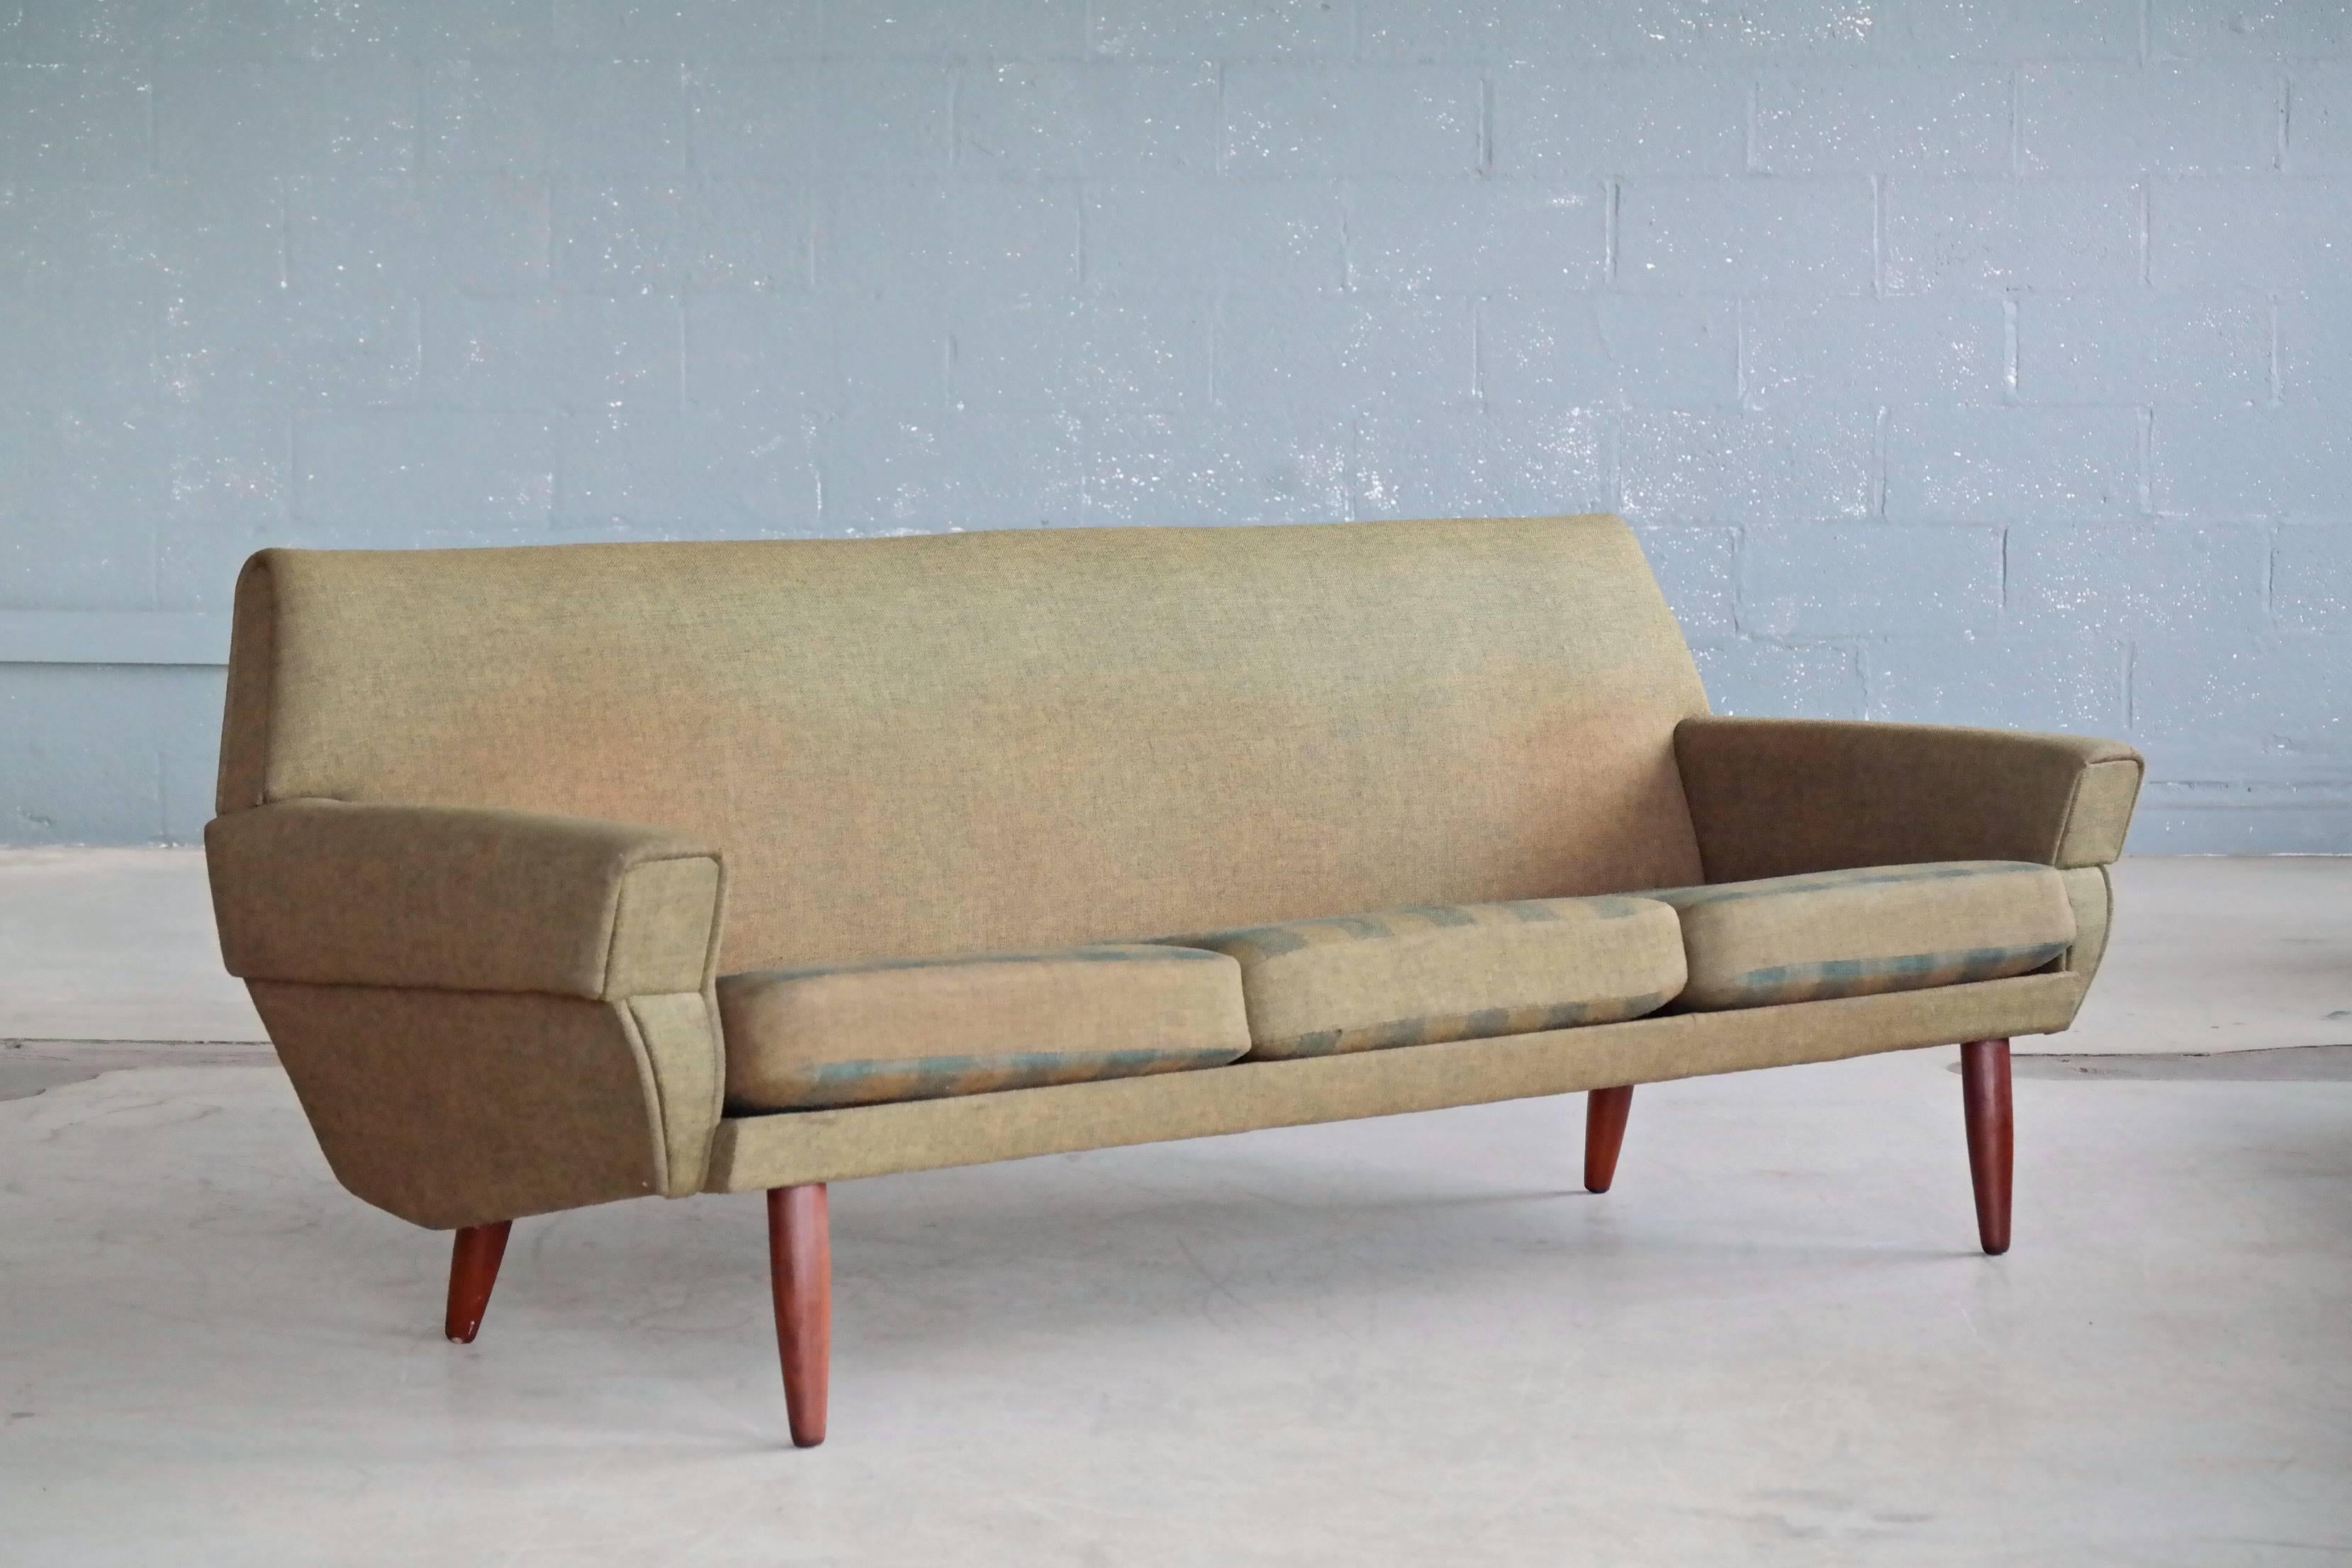 Classic Danish 1960s designed sofa. Based on the style and build quality it appears to be made by either Ryesberg or Rolschau Mobler of Denmark both of which produced furniture for Designer Kurt Ostervig. This sofa is very reminiscent of Ostervig